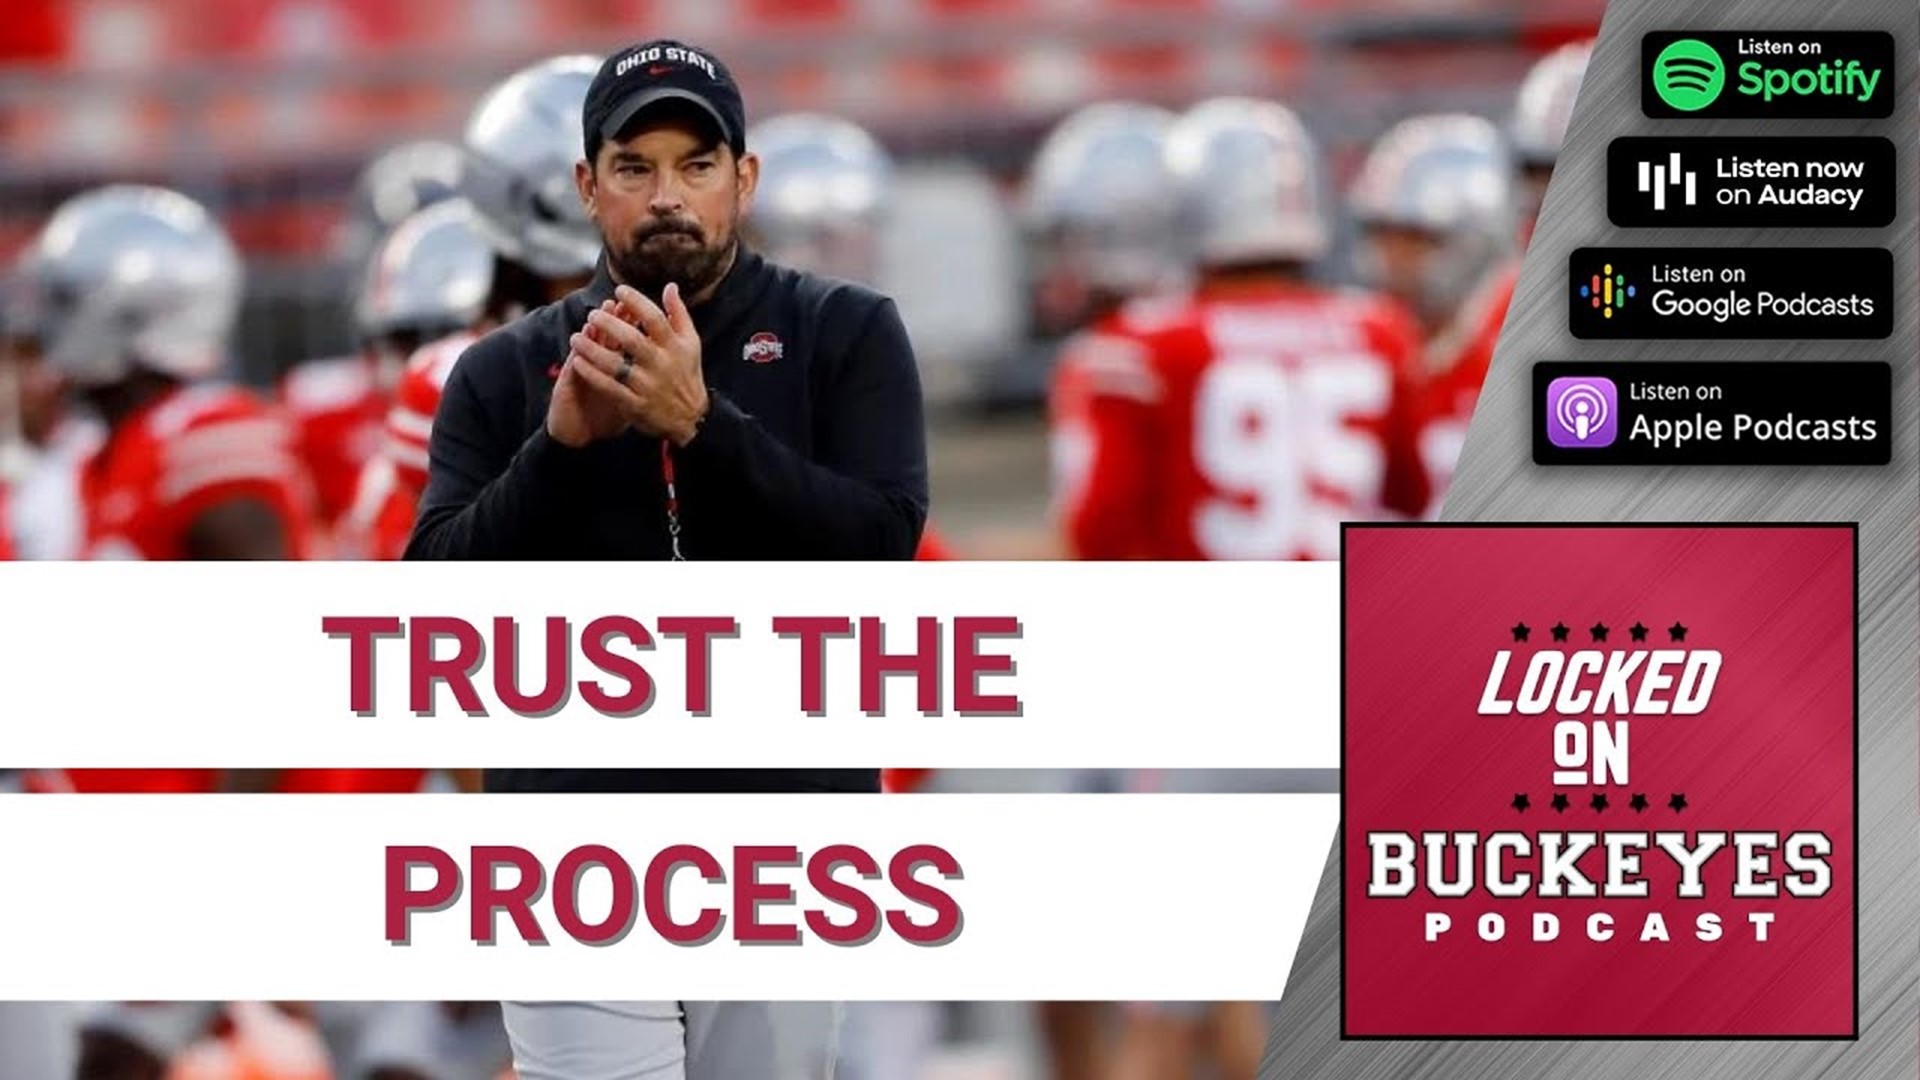 In this edition of Locked On Buckeyes, we discuss how Eddie George learns to embrace coaching along with some conversation on Ryan Day.